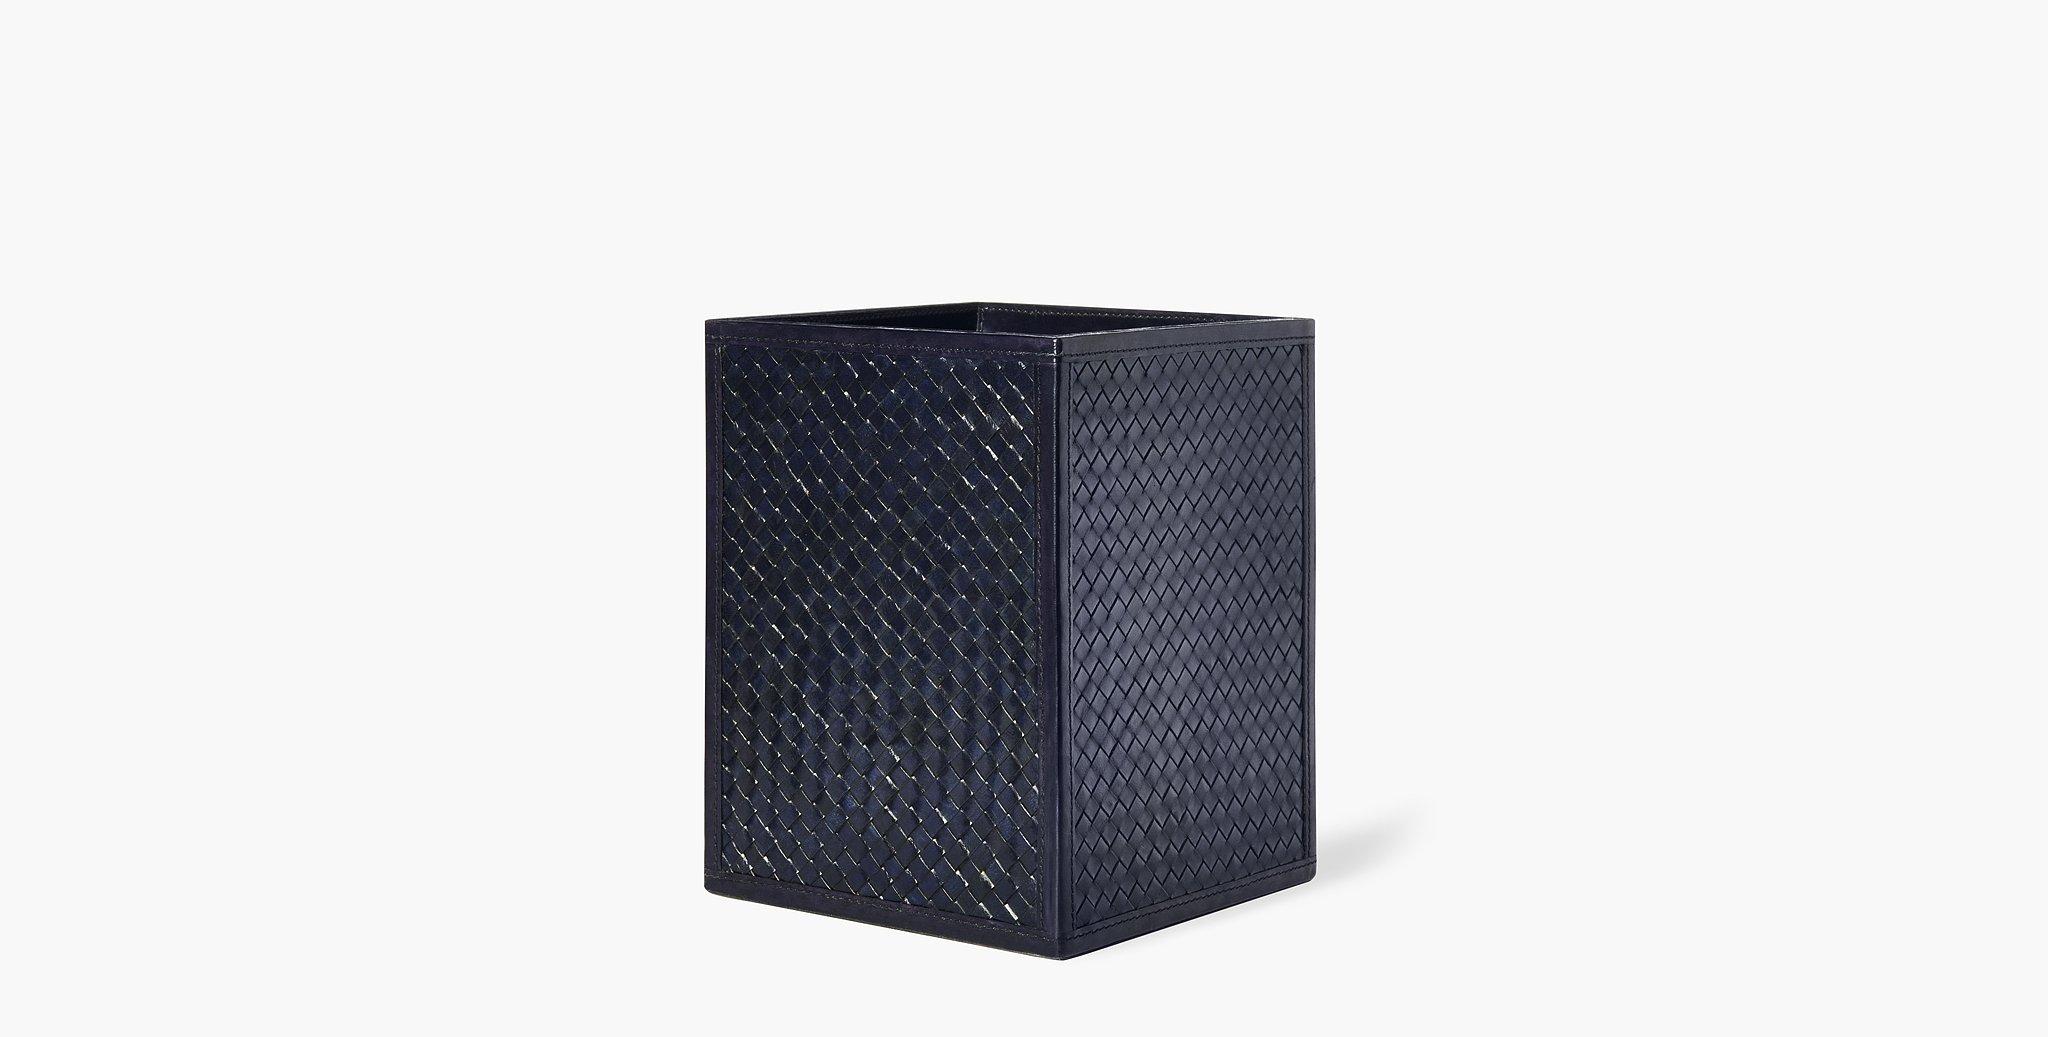 The Clarion wastebasket features a sleek profile and textured leather exterior that will hold up to regular day-to-day use.

Basketweave leather design
Imported